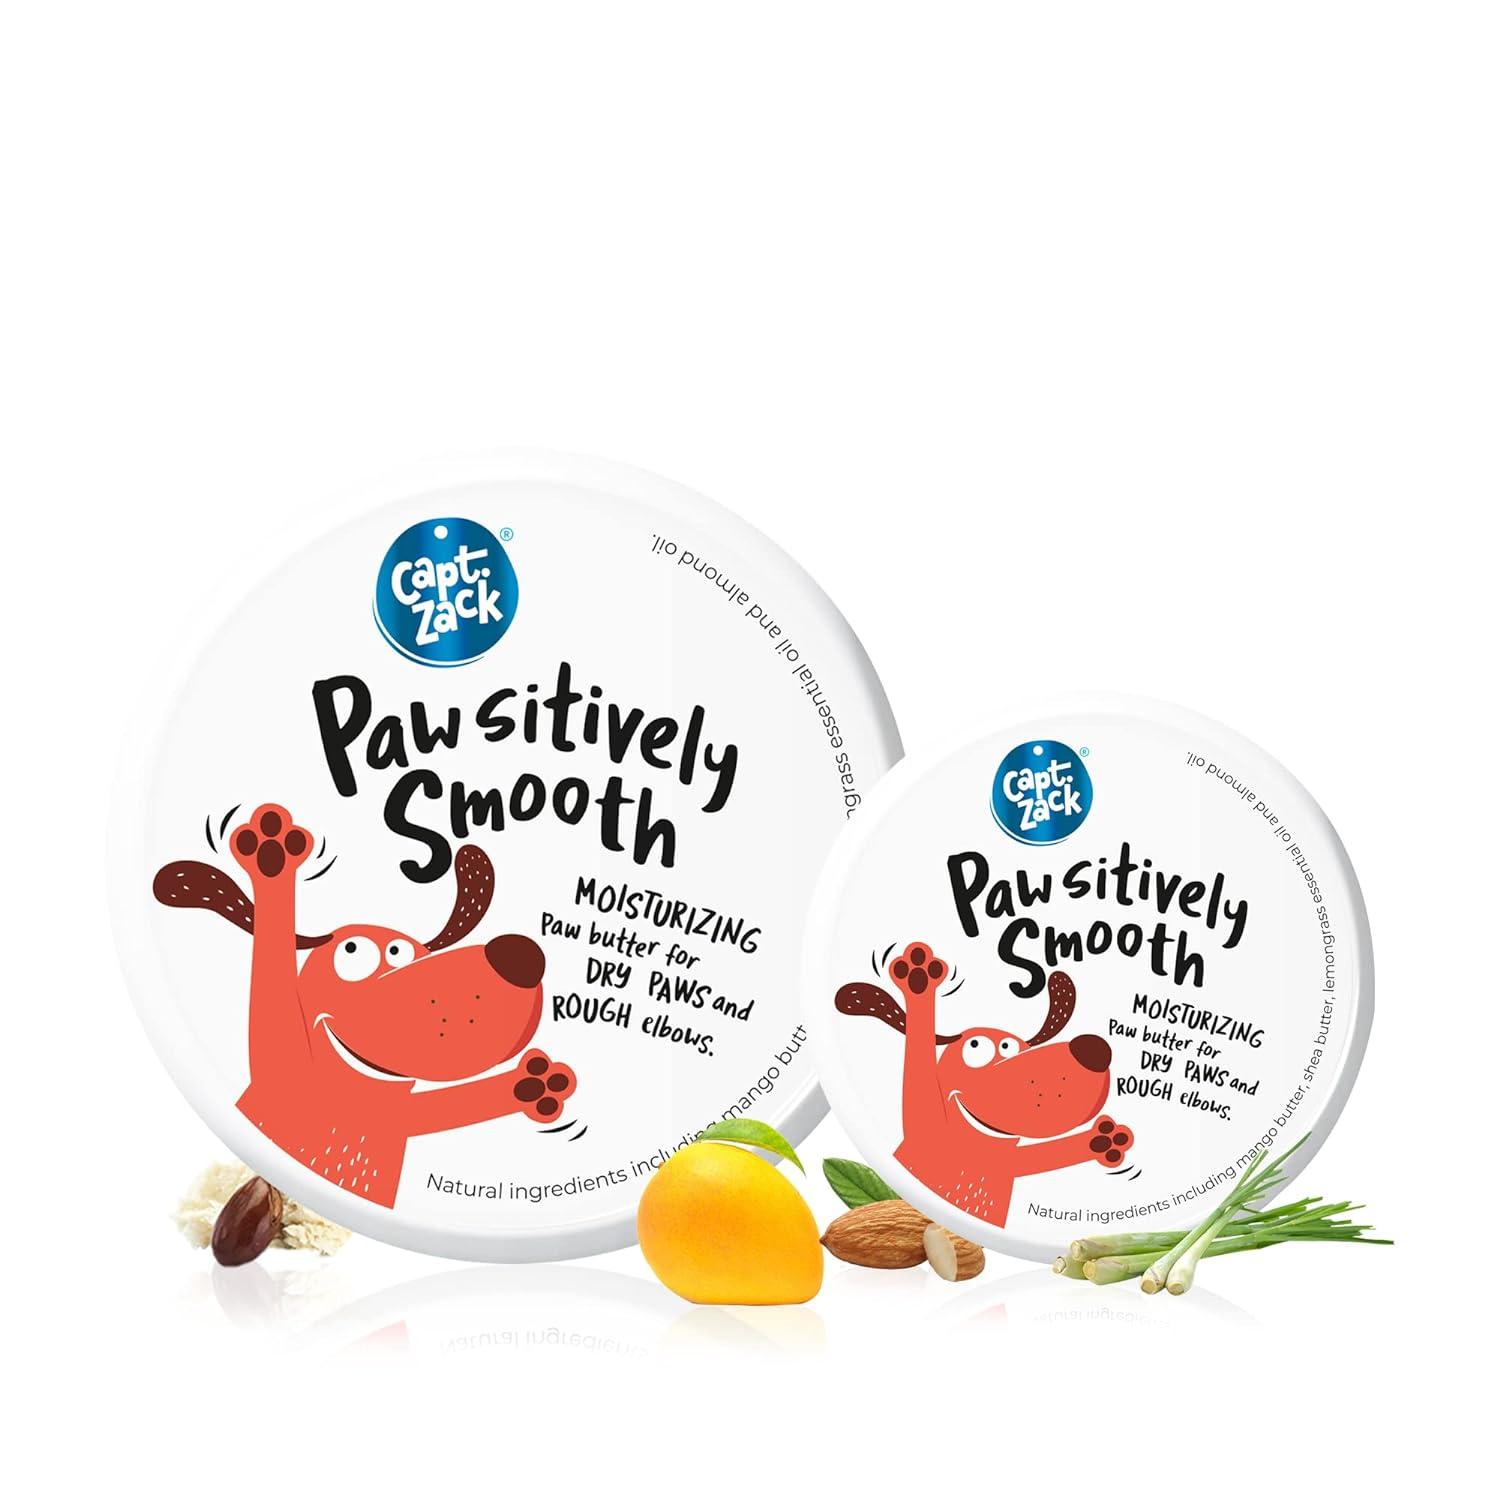 Pawsitively Smooth Paw Butter for Pets 100g + Free 25g